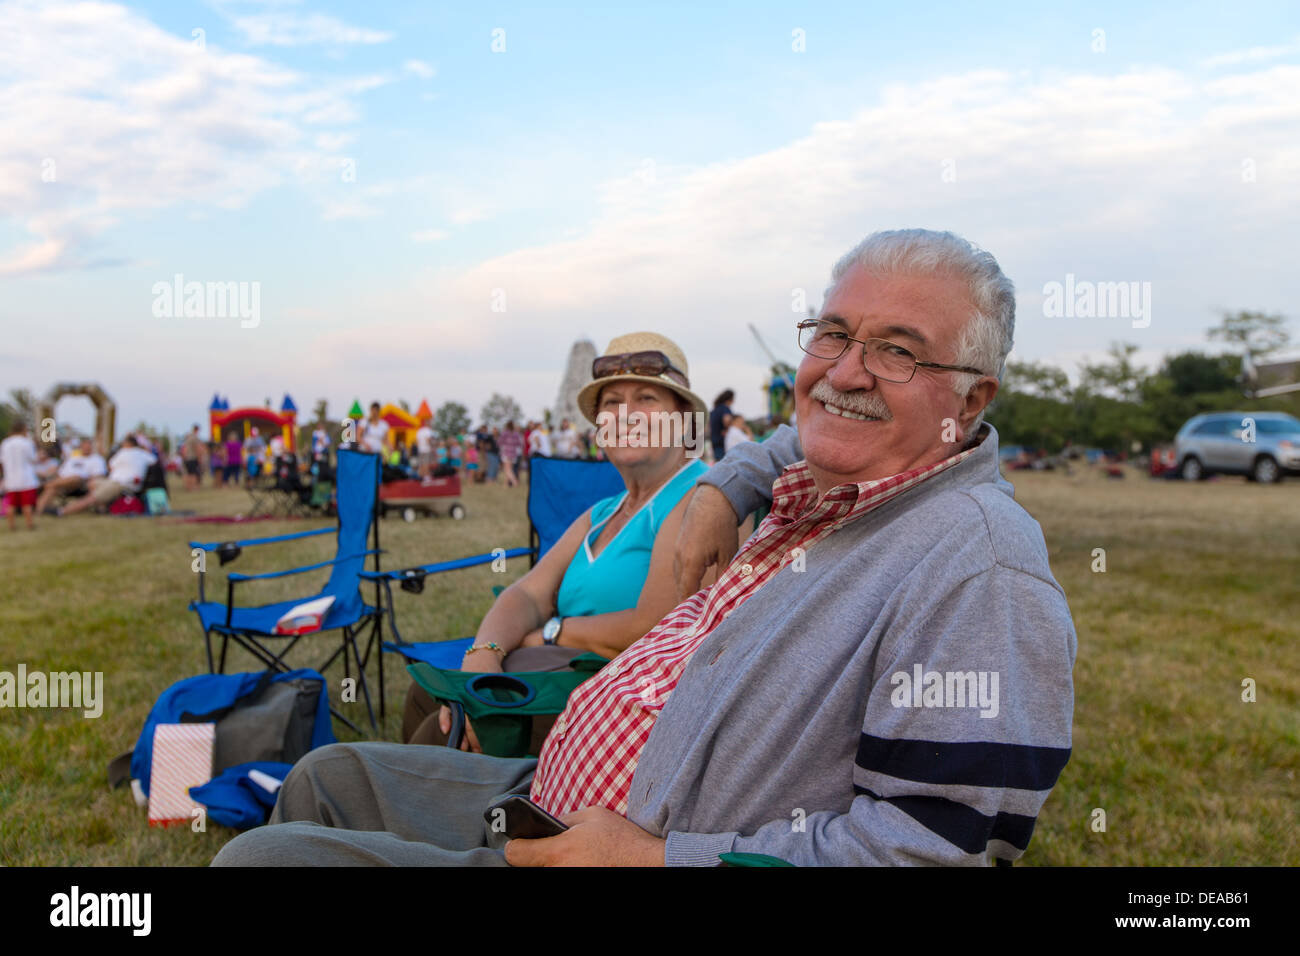 Elderly couple of spectators sitting in deckchairs at an outdoors event on a field turning to smile at the camera Stock Photo